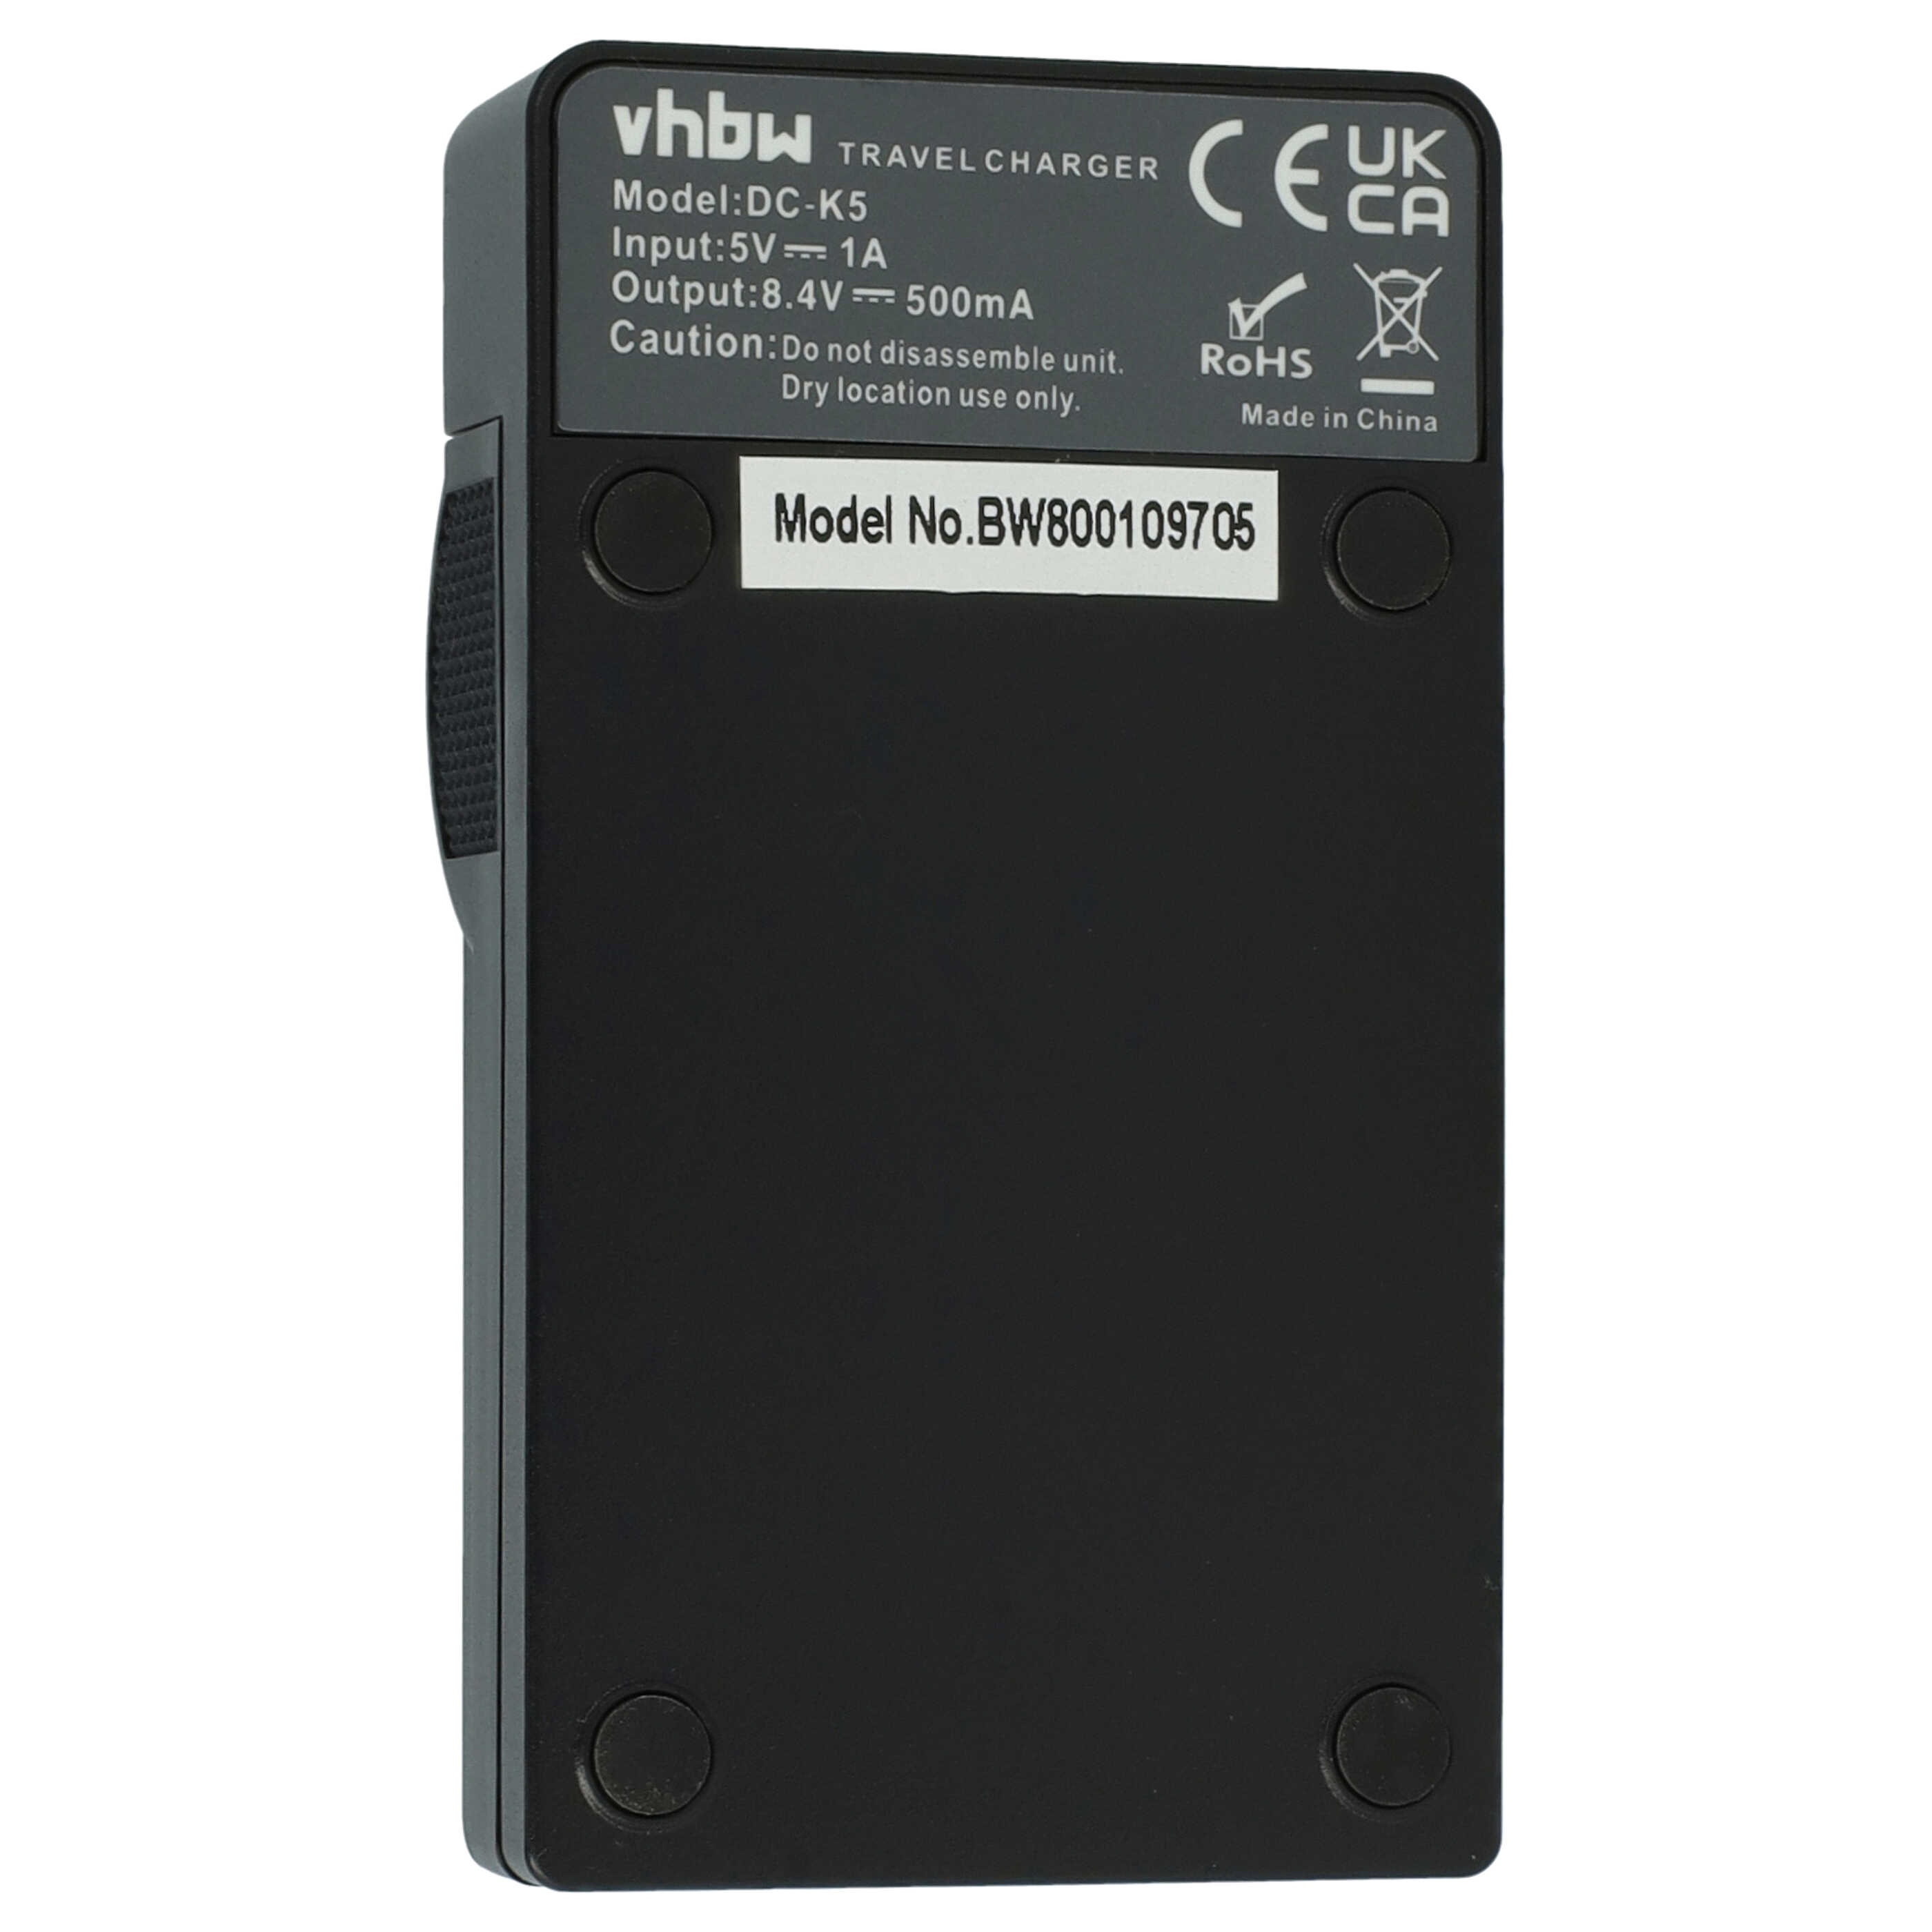 Battery Charger suitable for Canon BP-807 Camera etc. - 0.5 A, 8.4 V